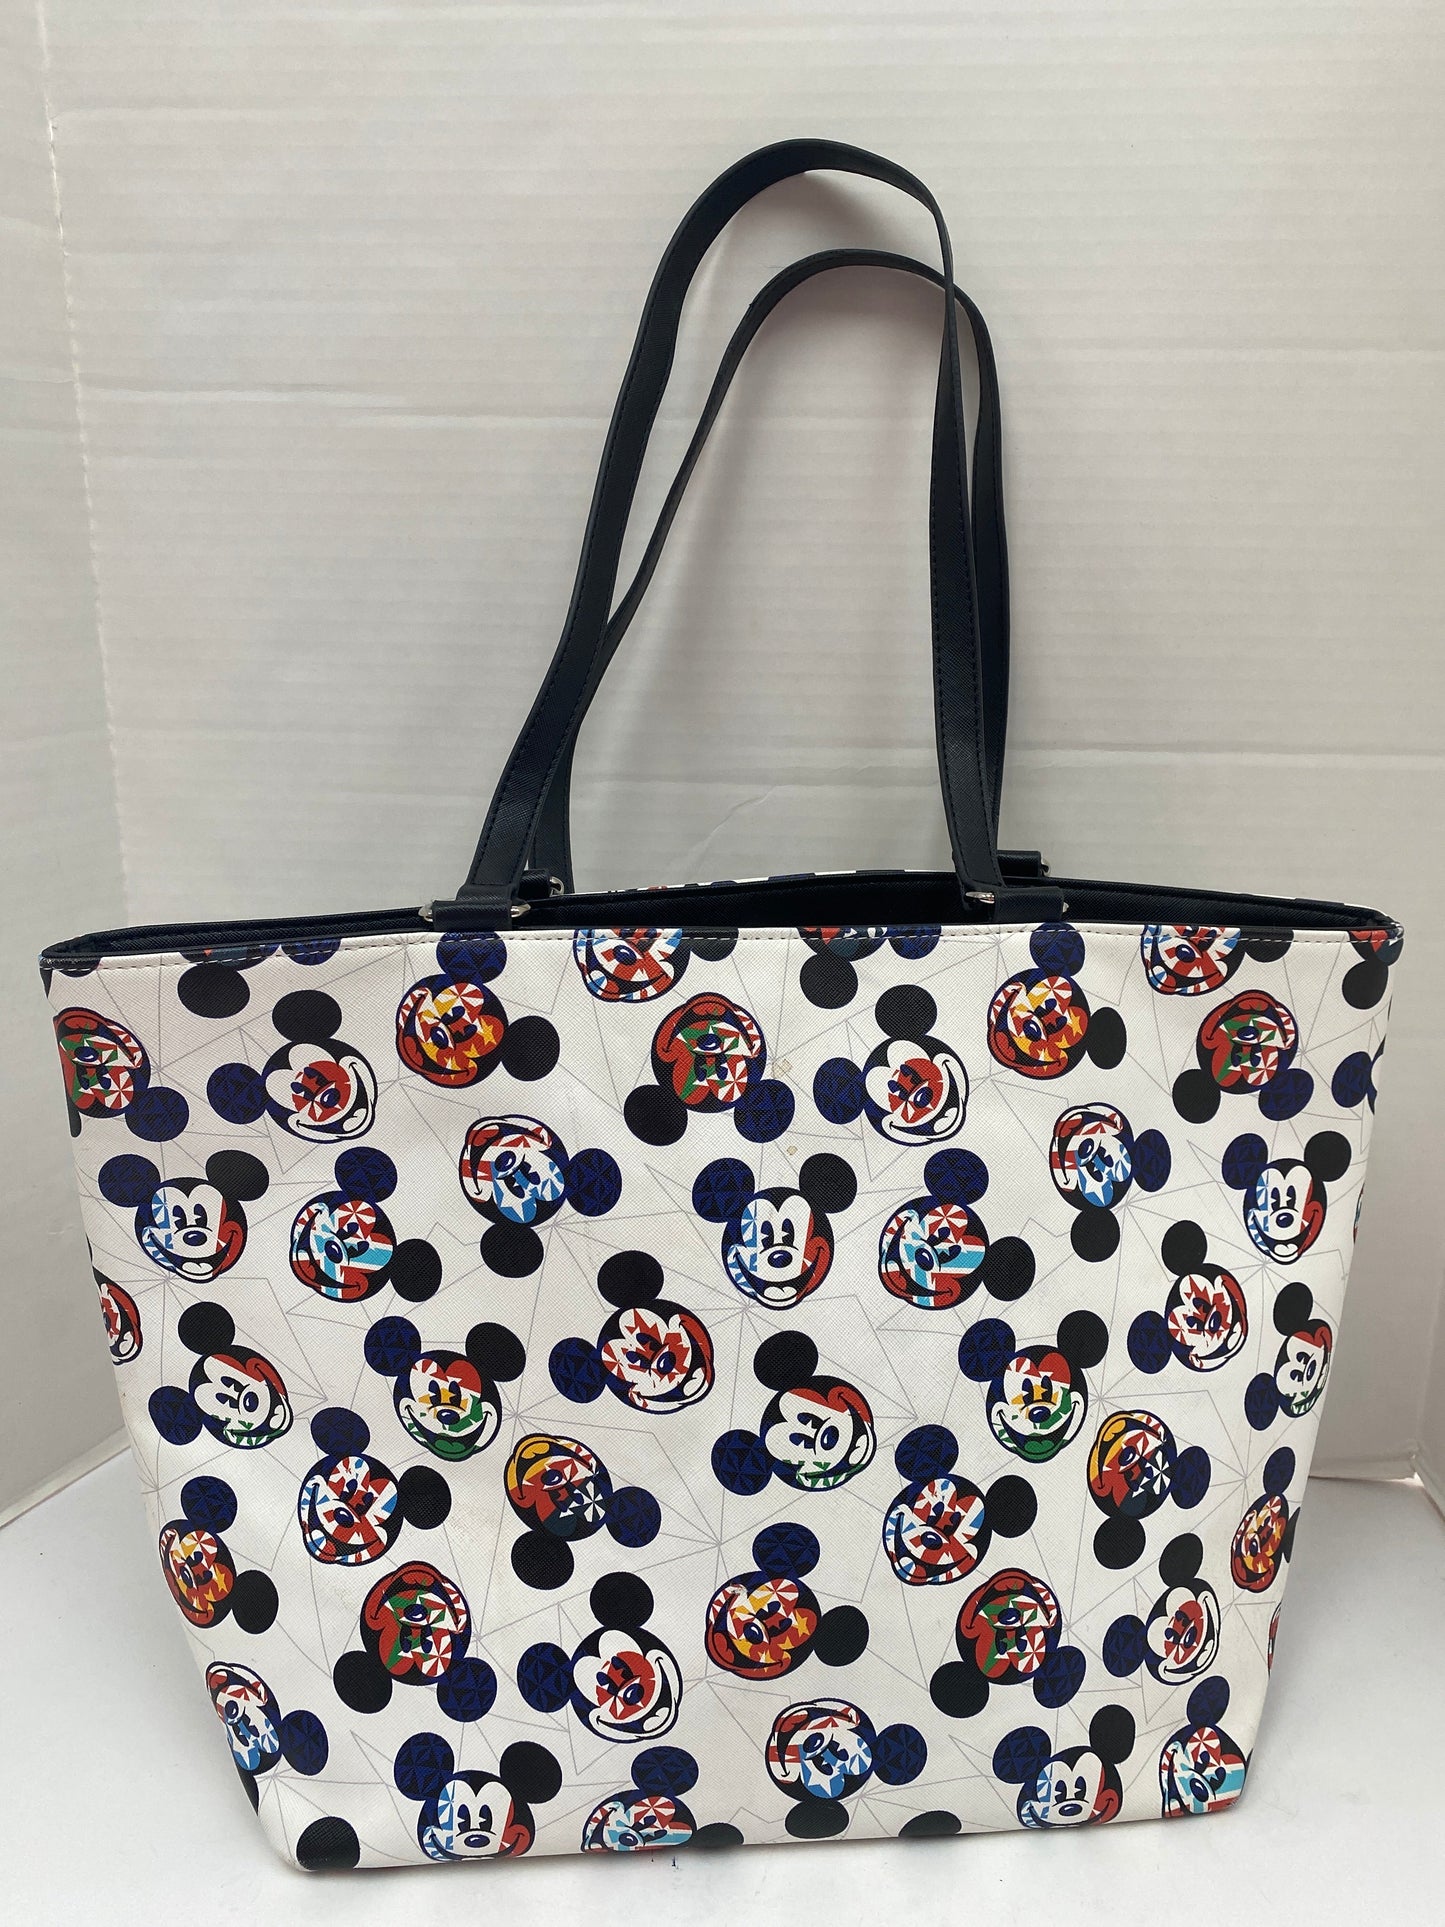 Tote Disney Store, Size Large